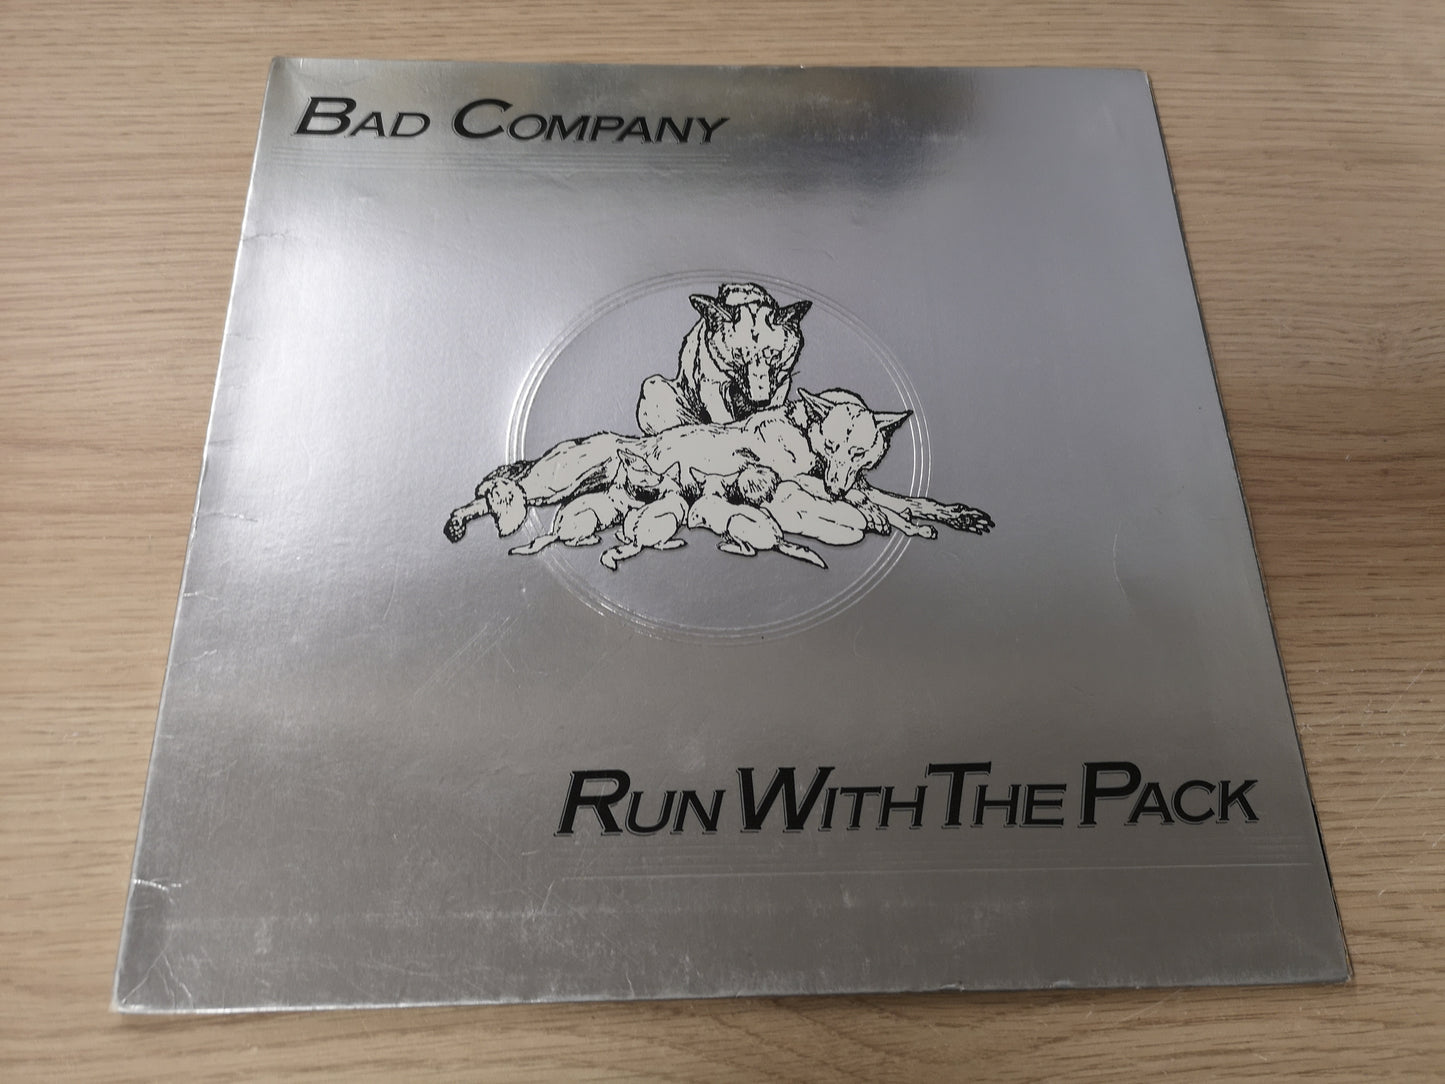 Bad Company "Run with the Pack" Orig France 1976 VG++/VG++ Paul Rodgers